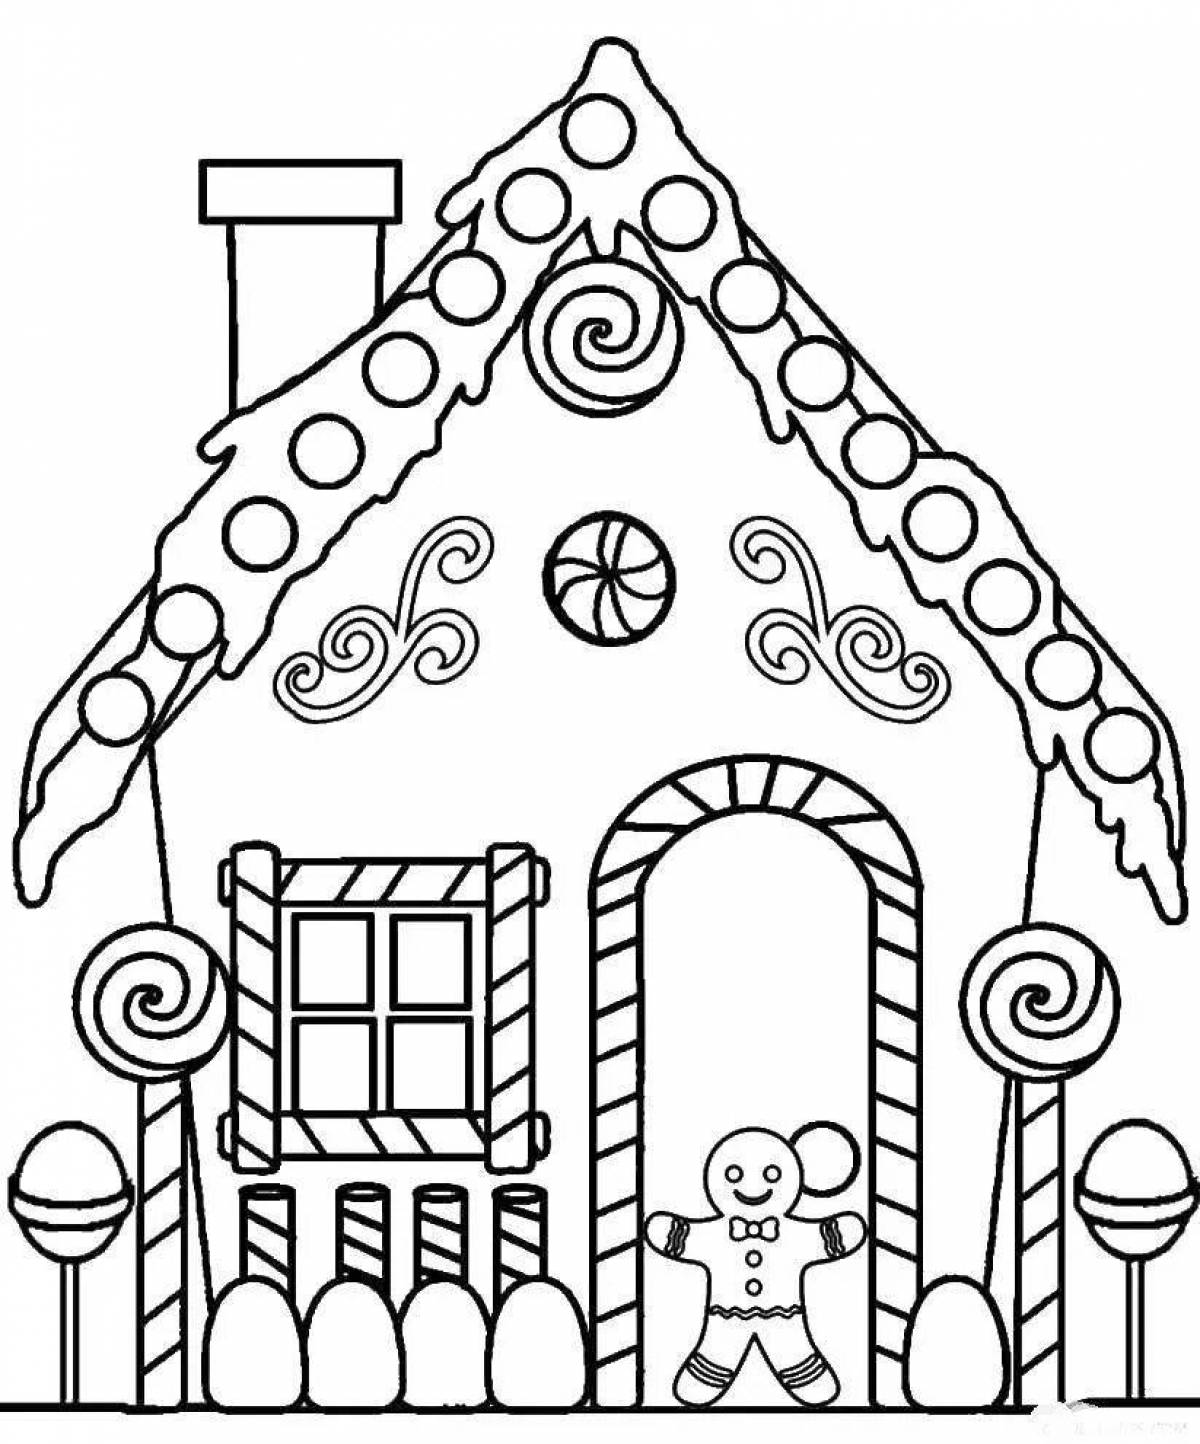 Sparkling Christmas house coloring page